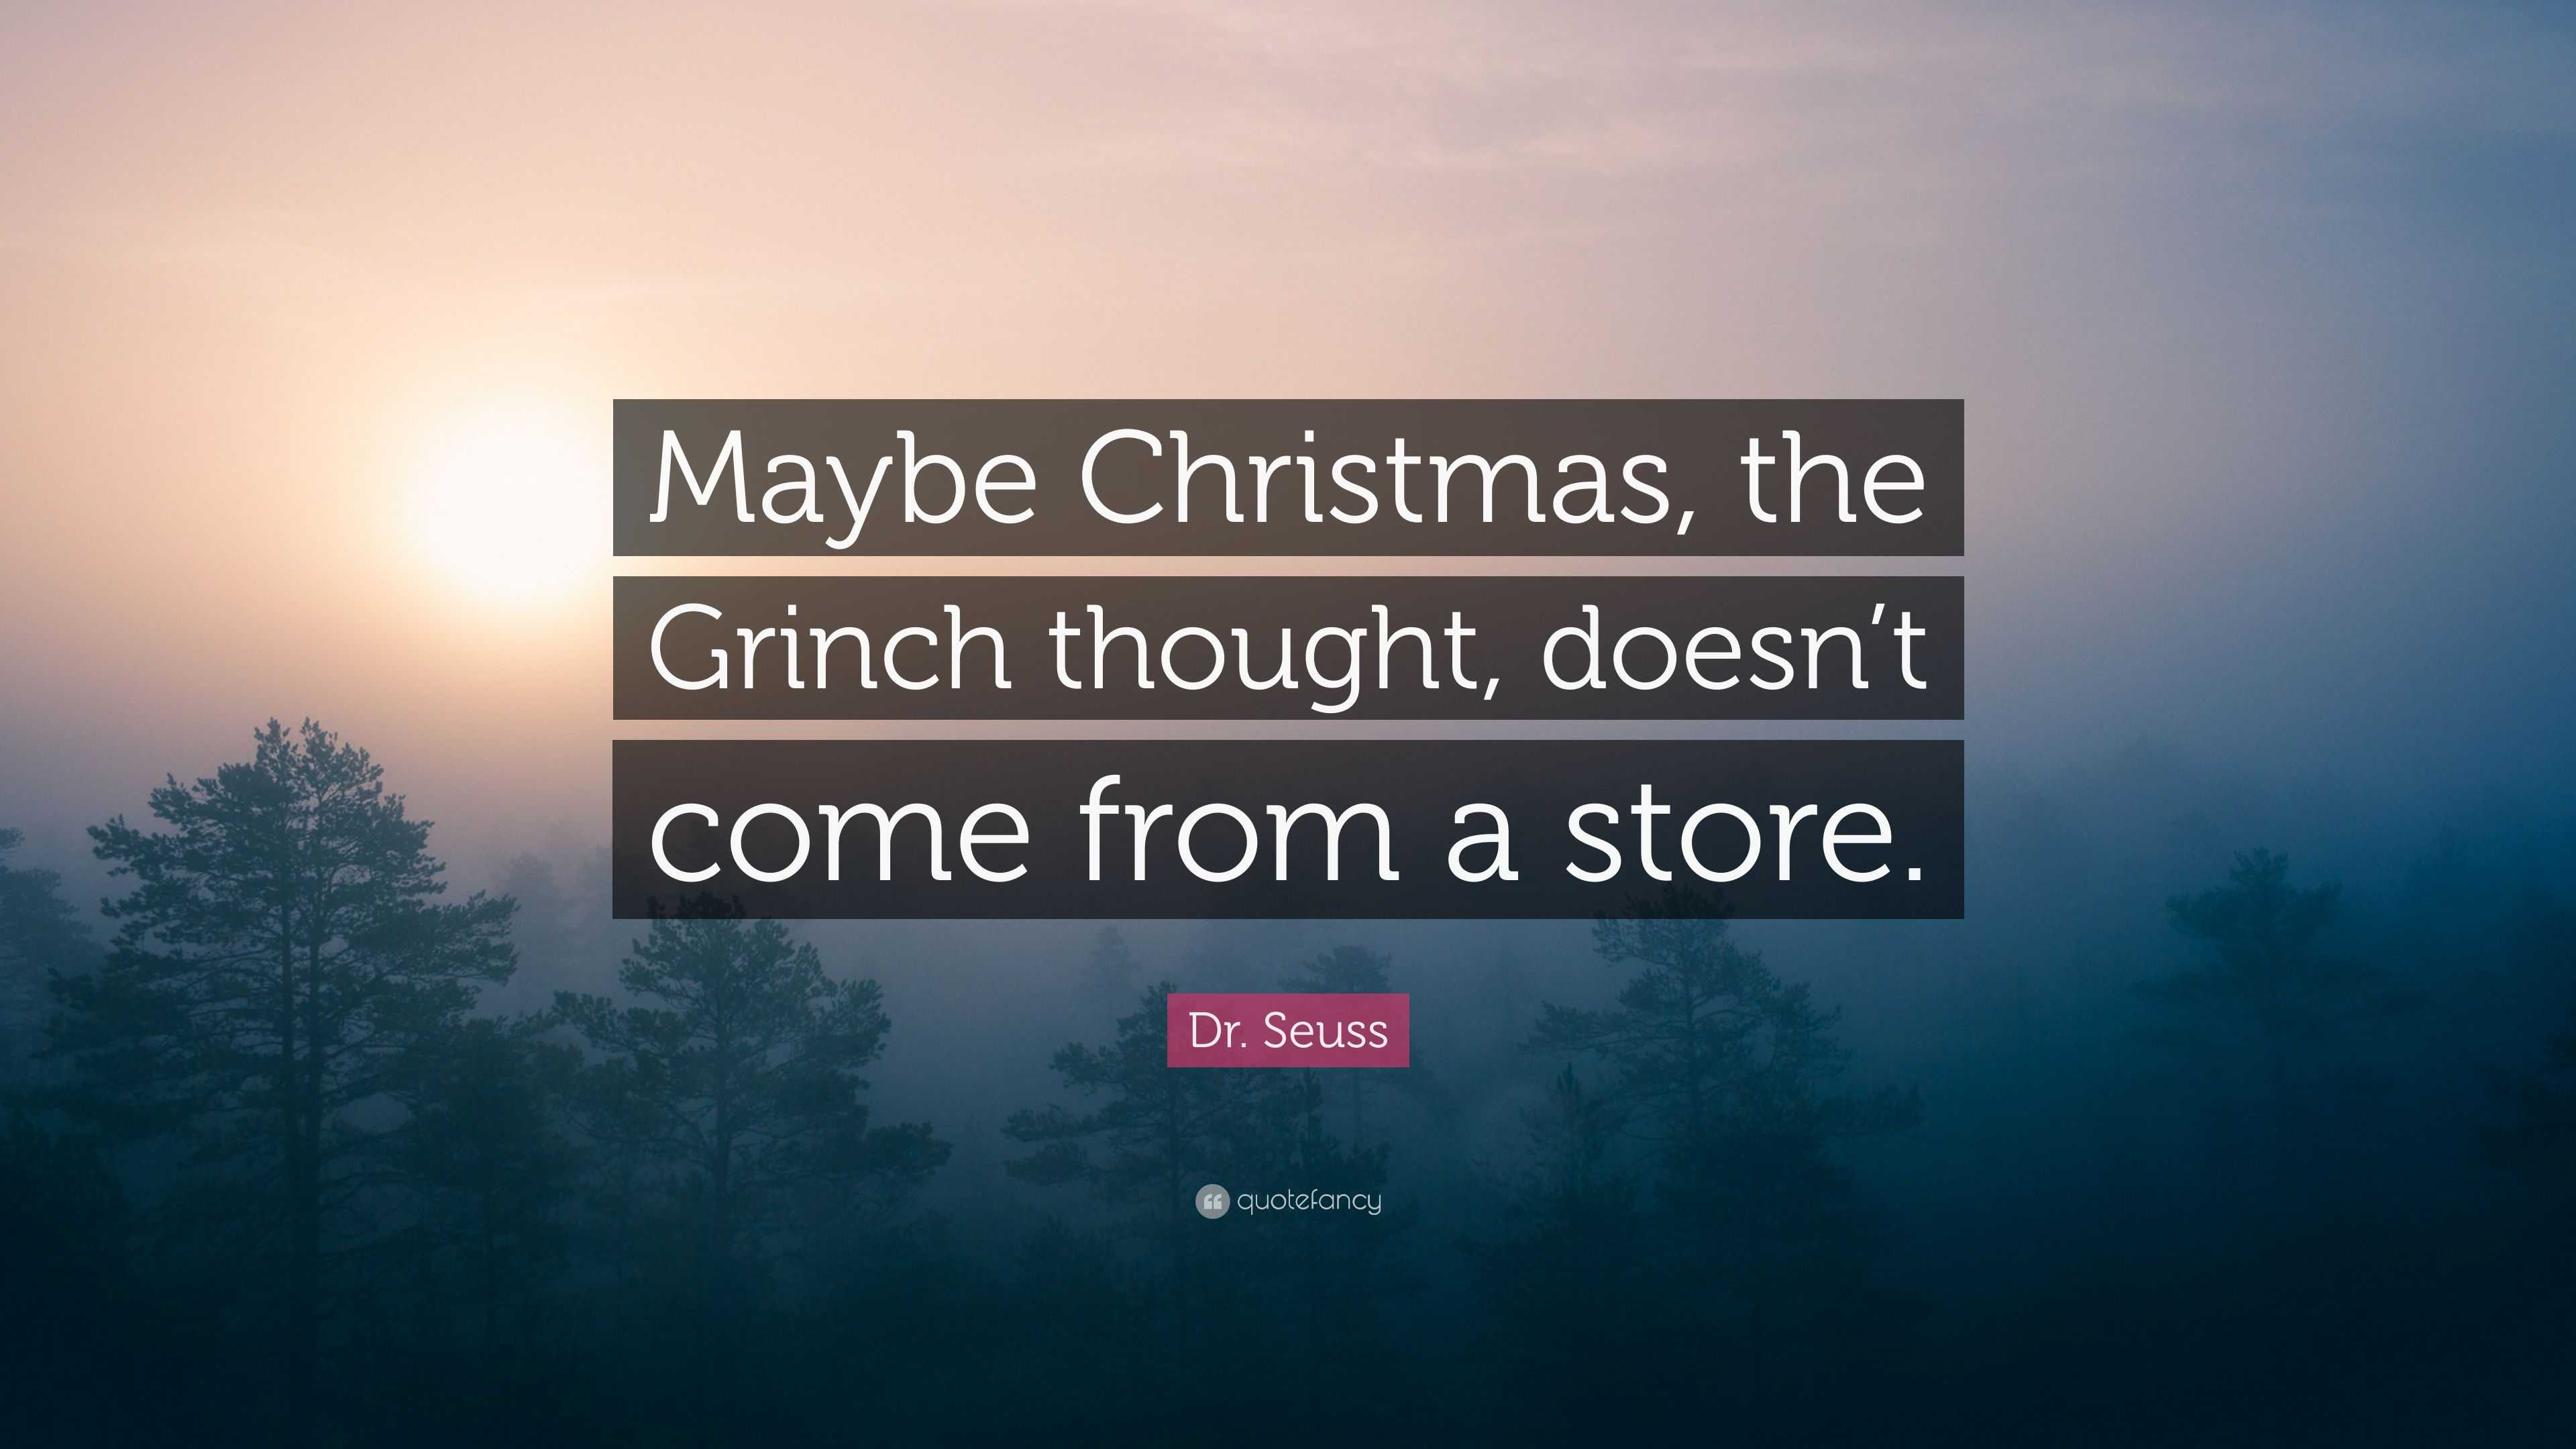 Dr. Seuss Quote: “Maybe Christmas, the Grinch thought, doesn’t come ...